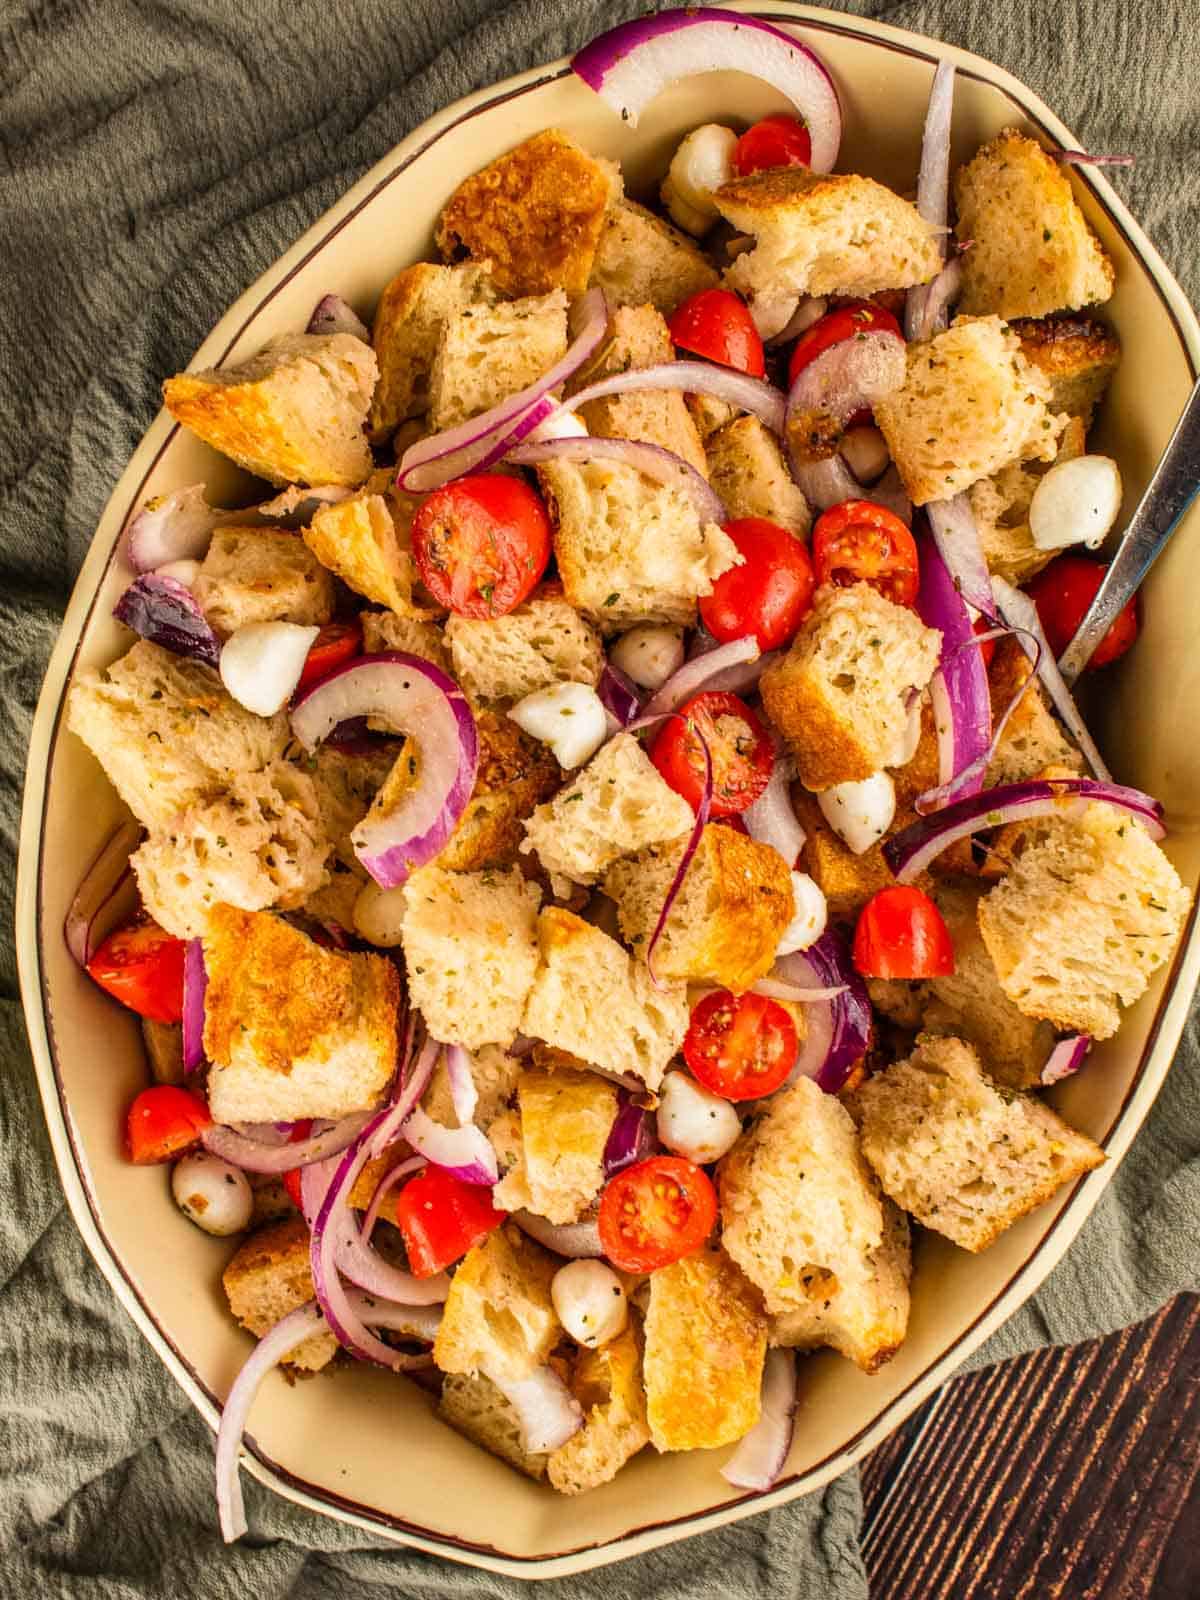 summer panzanella salad with tomatoes, cheese and onions in a ceramic dish